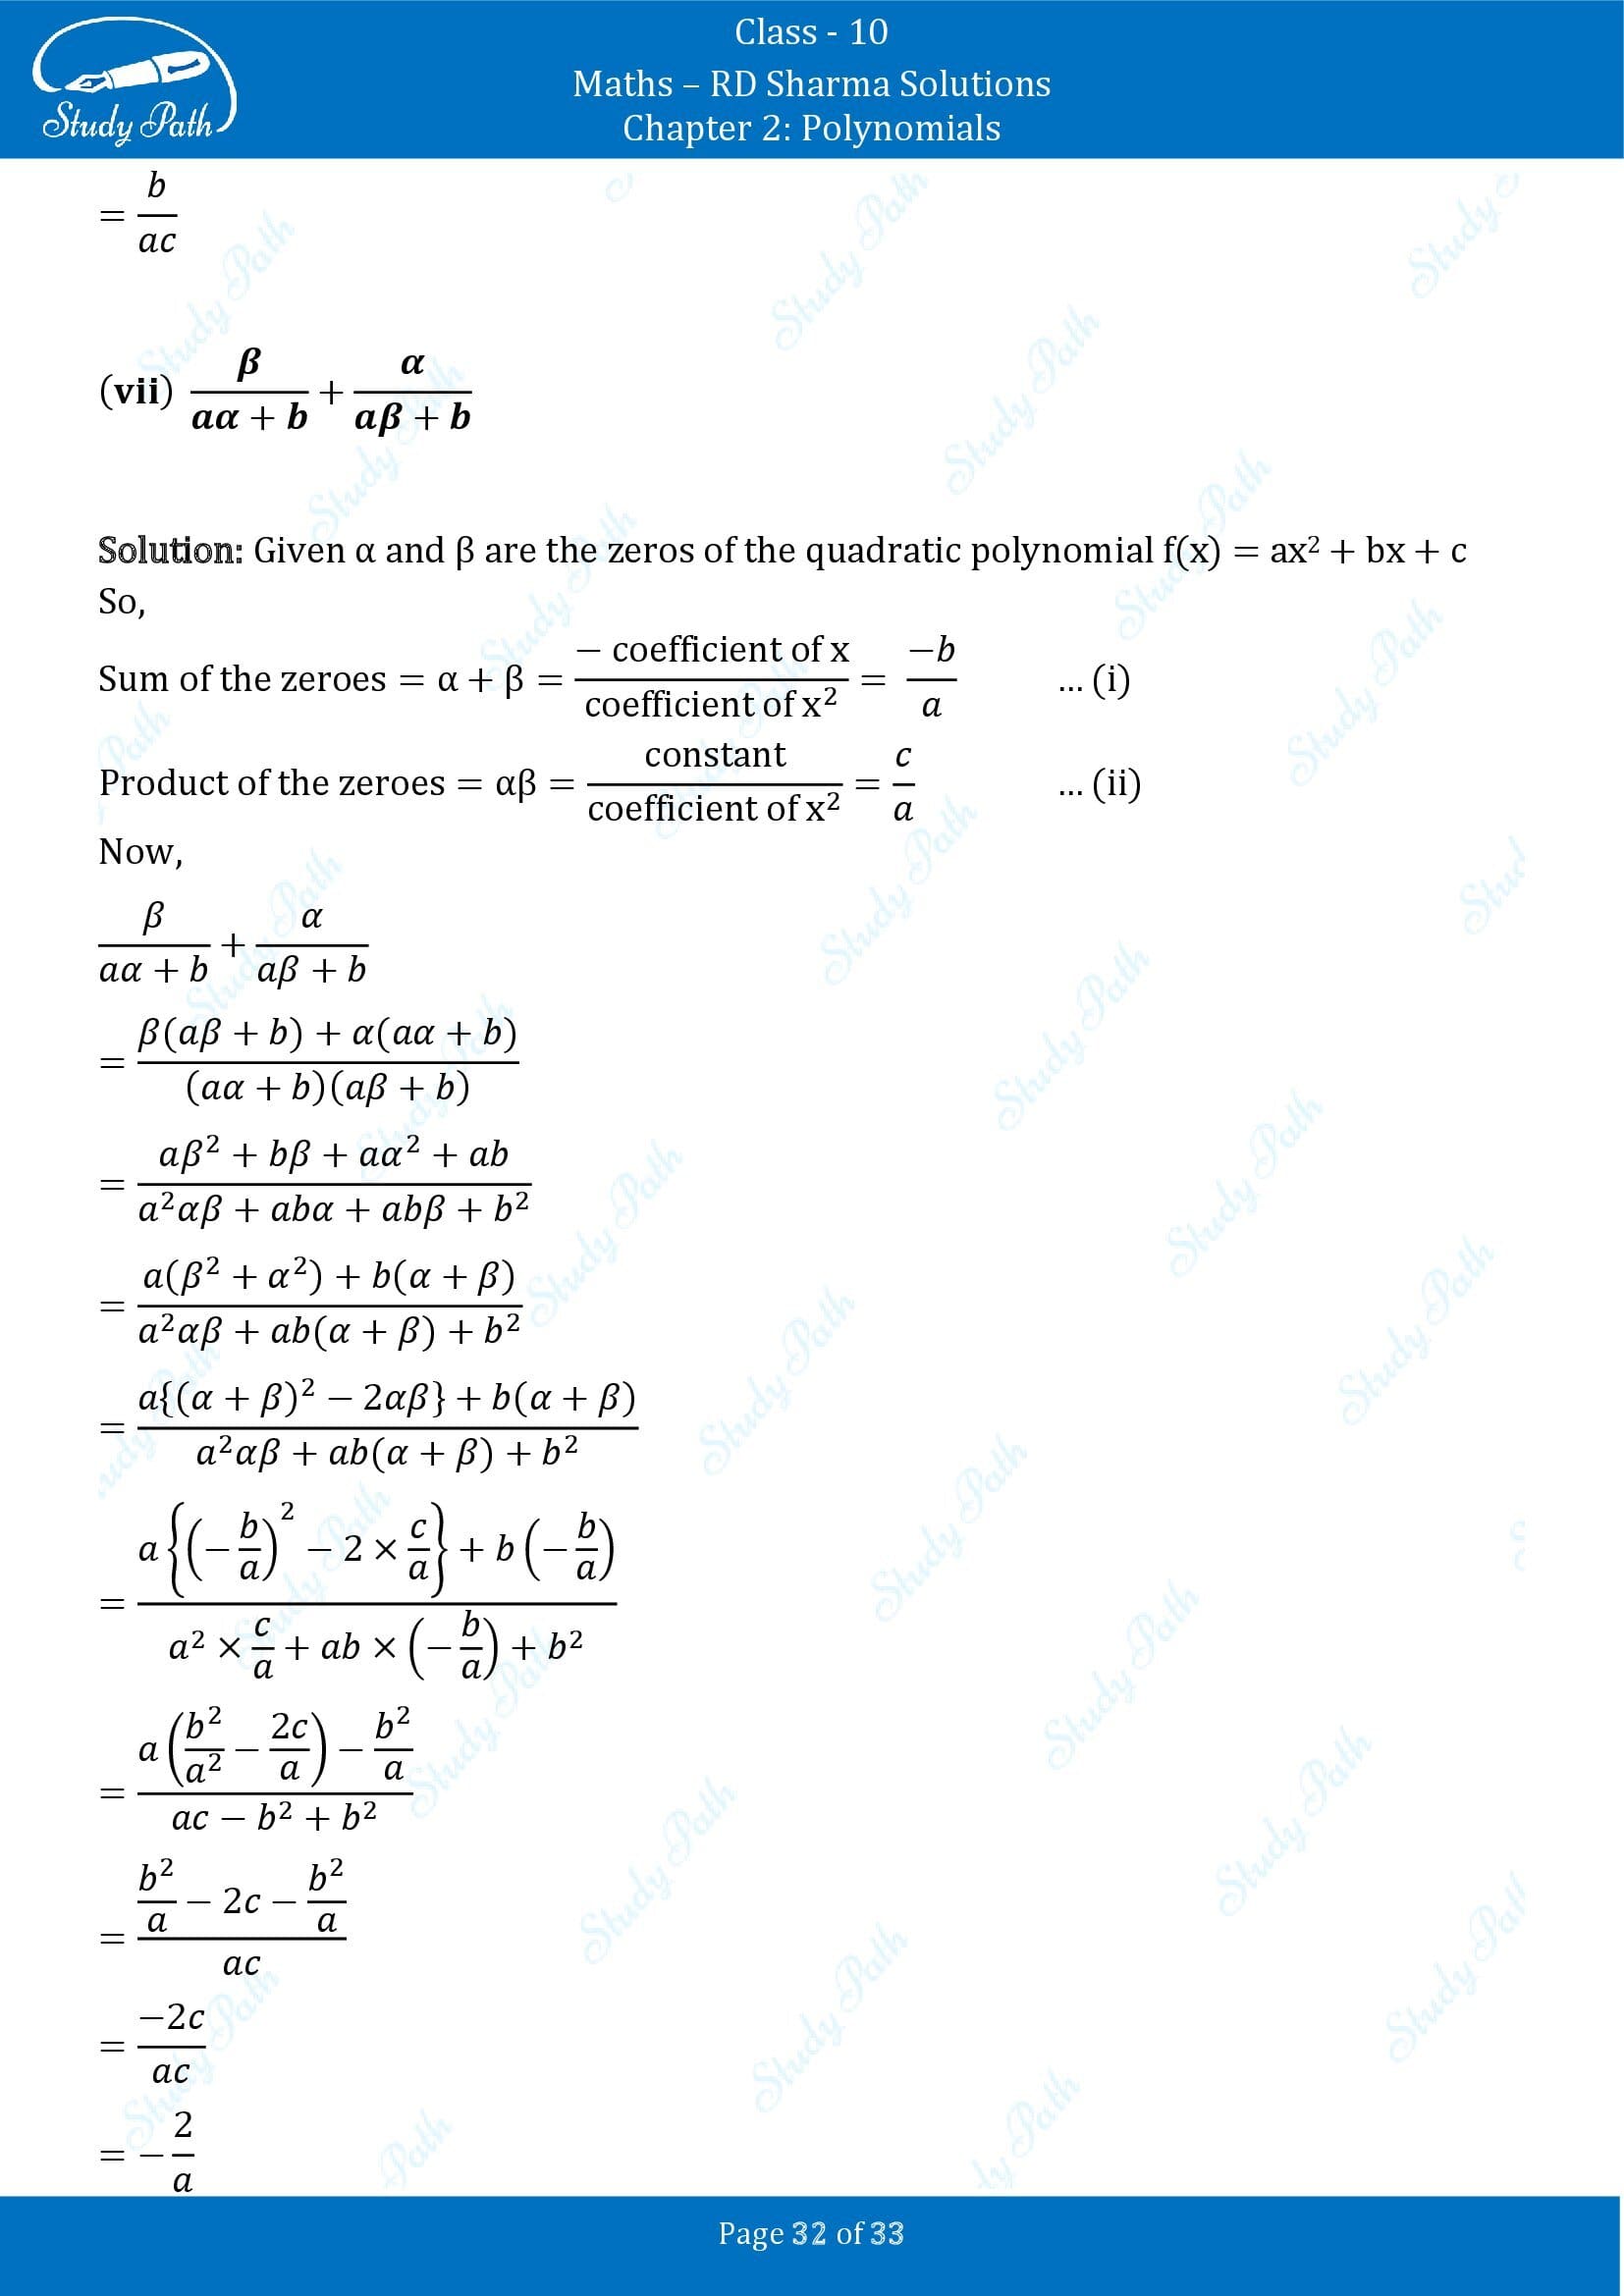 RD Sharma Solutions Class 10 Chapter 2 Polynomials Exercise 2.1 00032